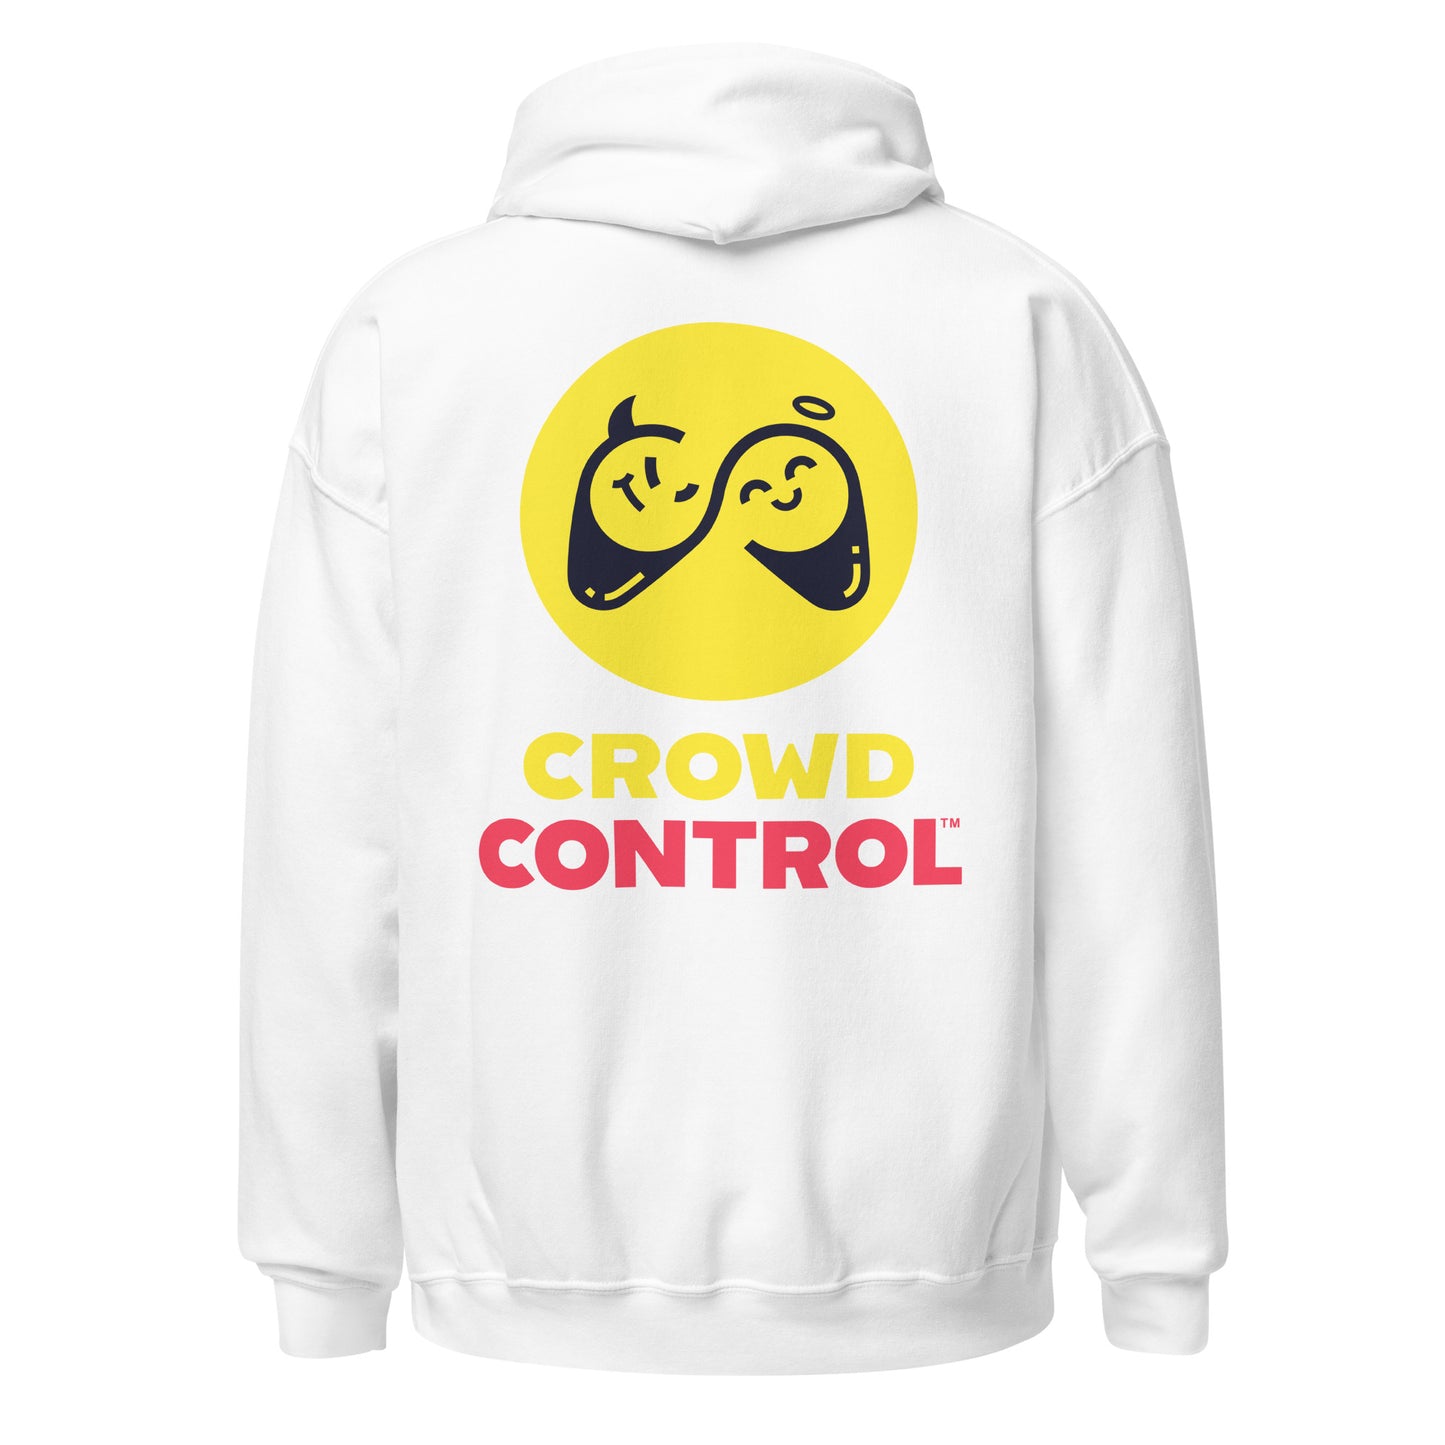 Crowd Control™ - Unisex Hoodie - Crowd Control Icon (Embroidered)